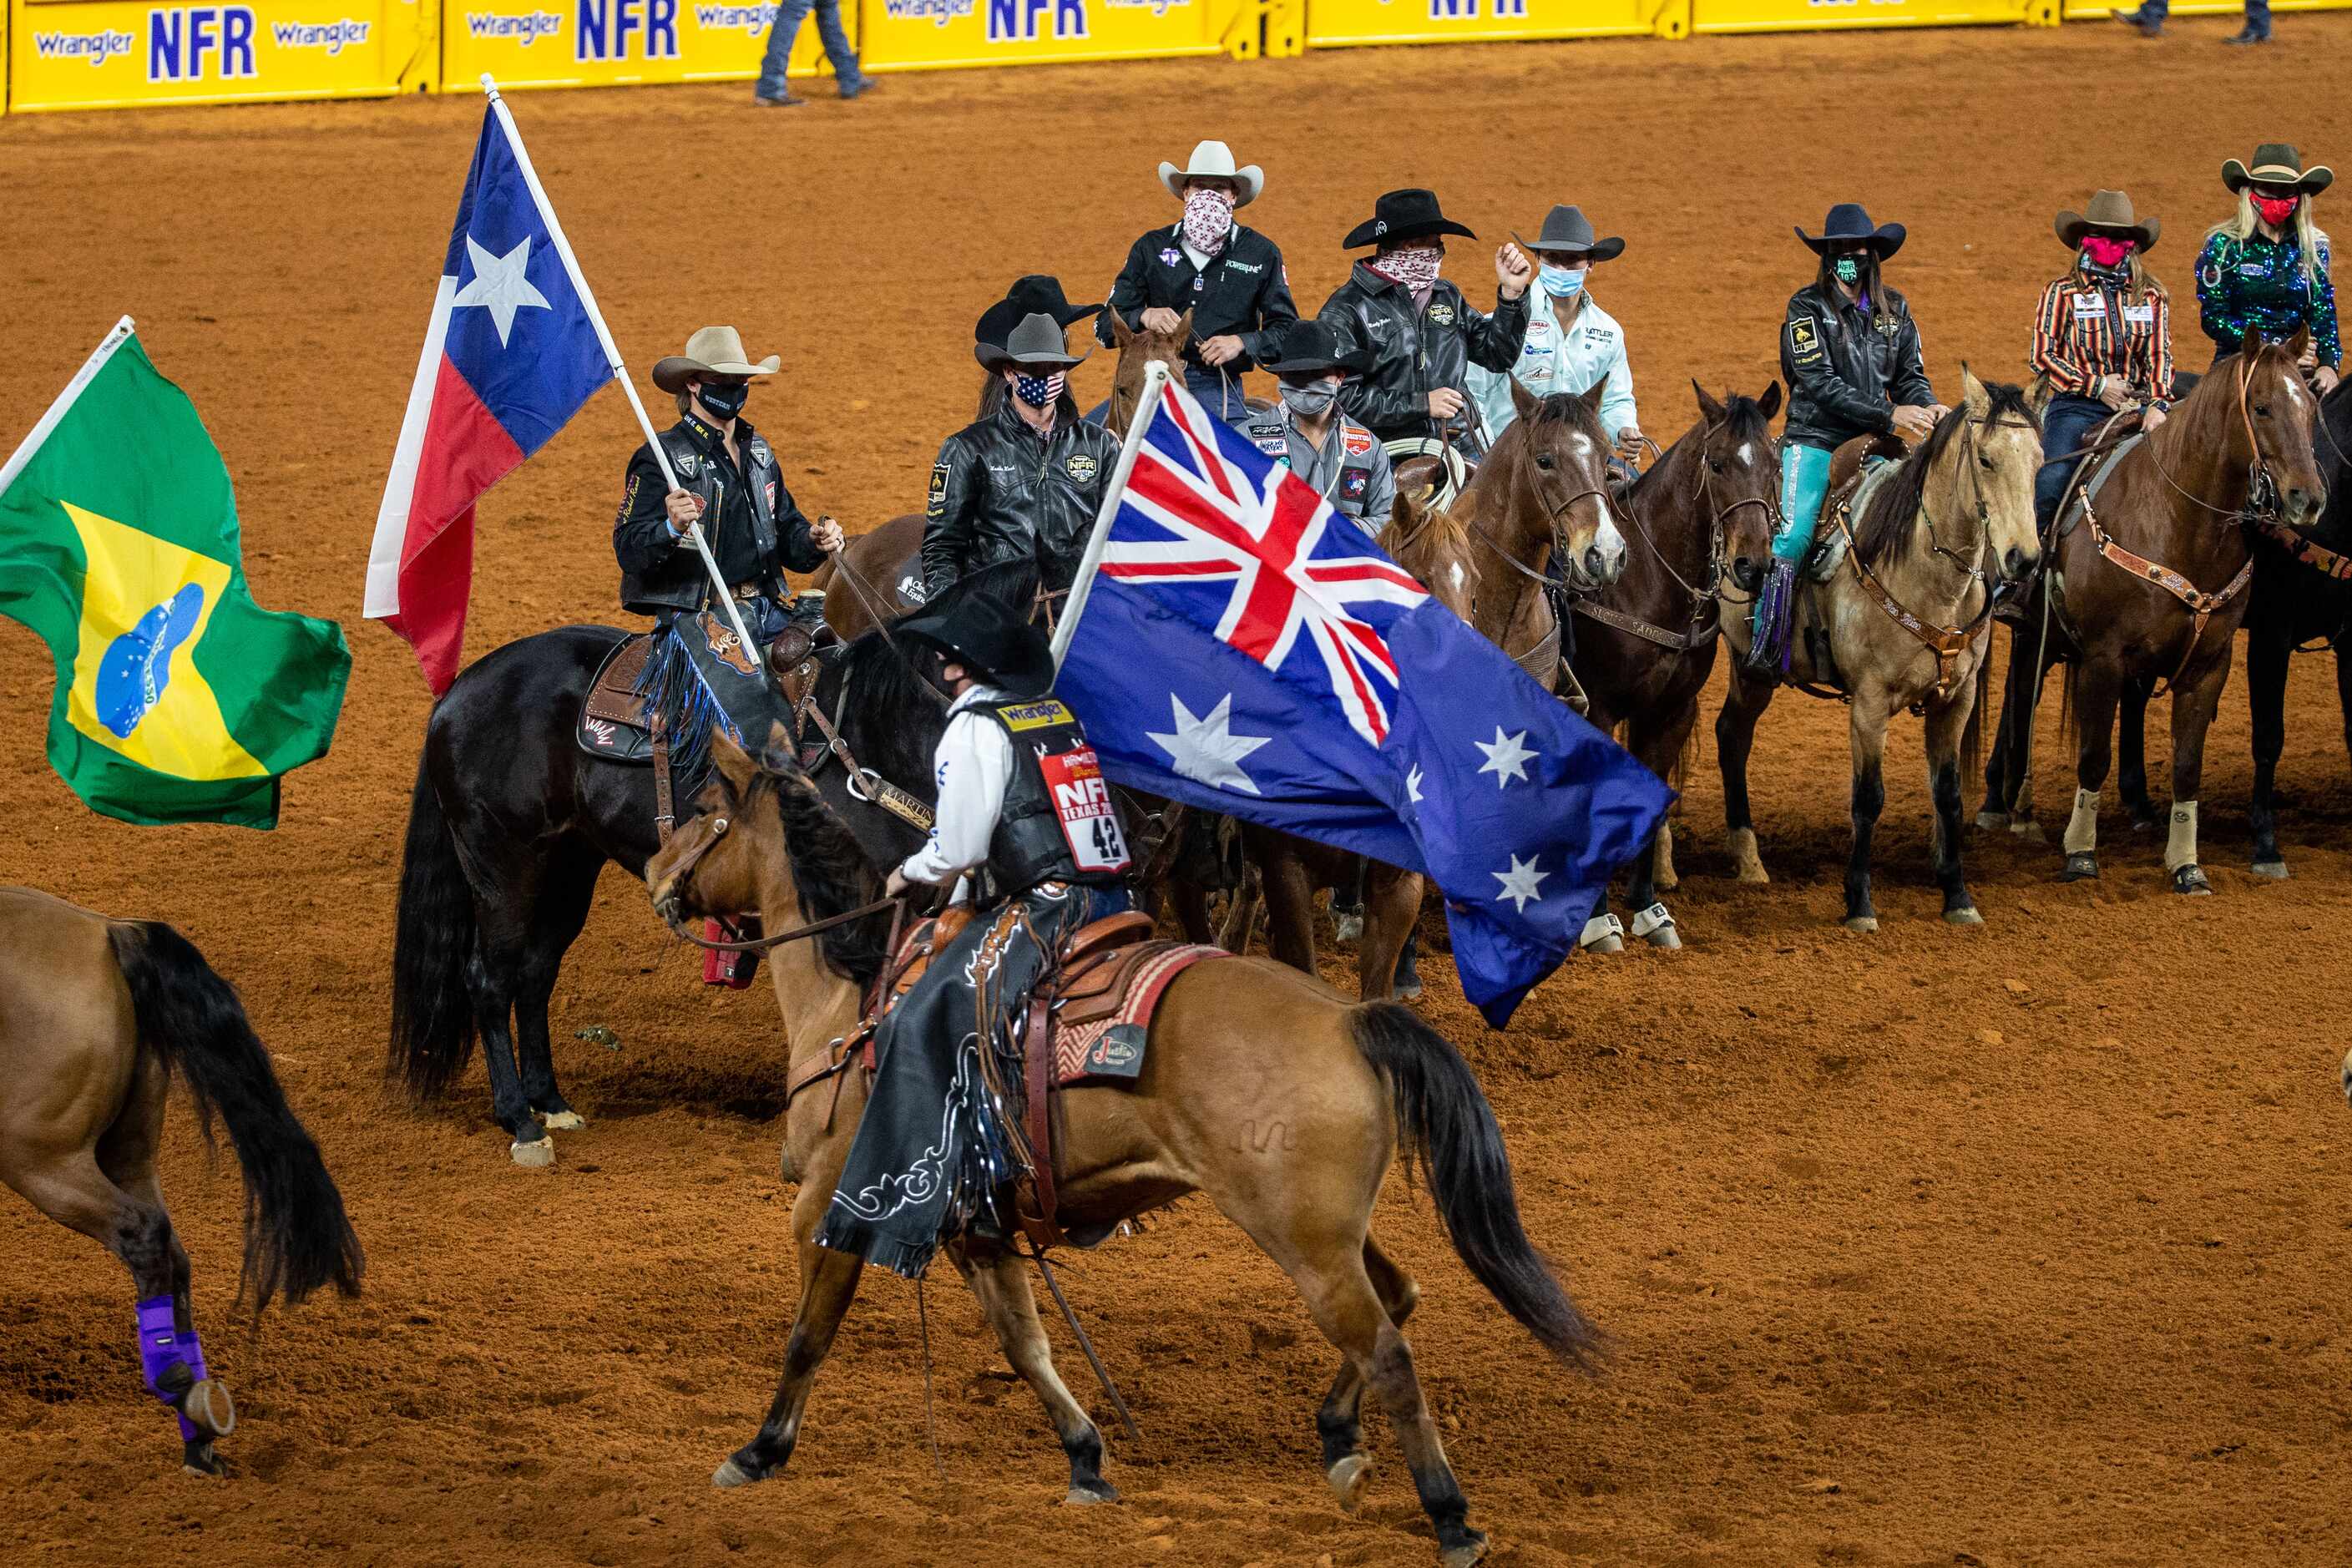 PRCA contestants from around the world gather during the opening night of the National...